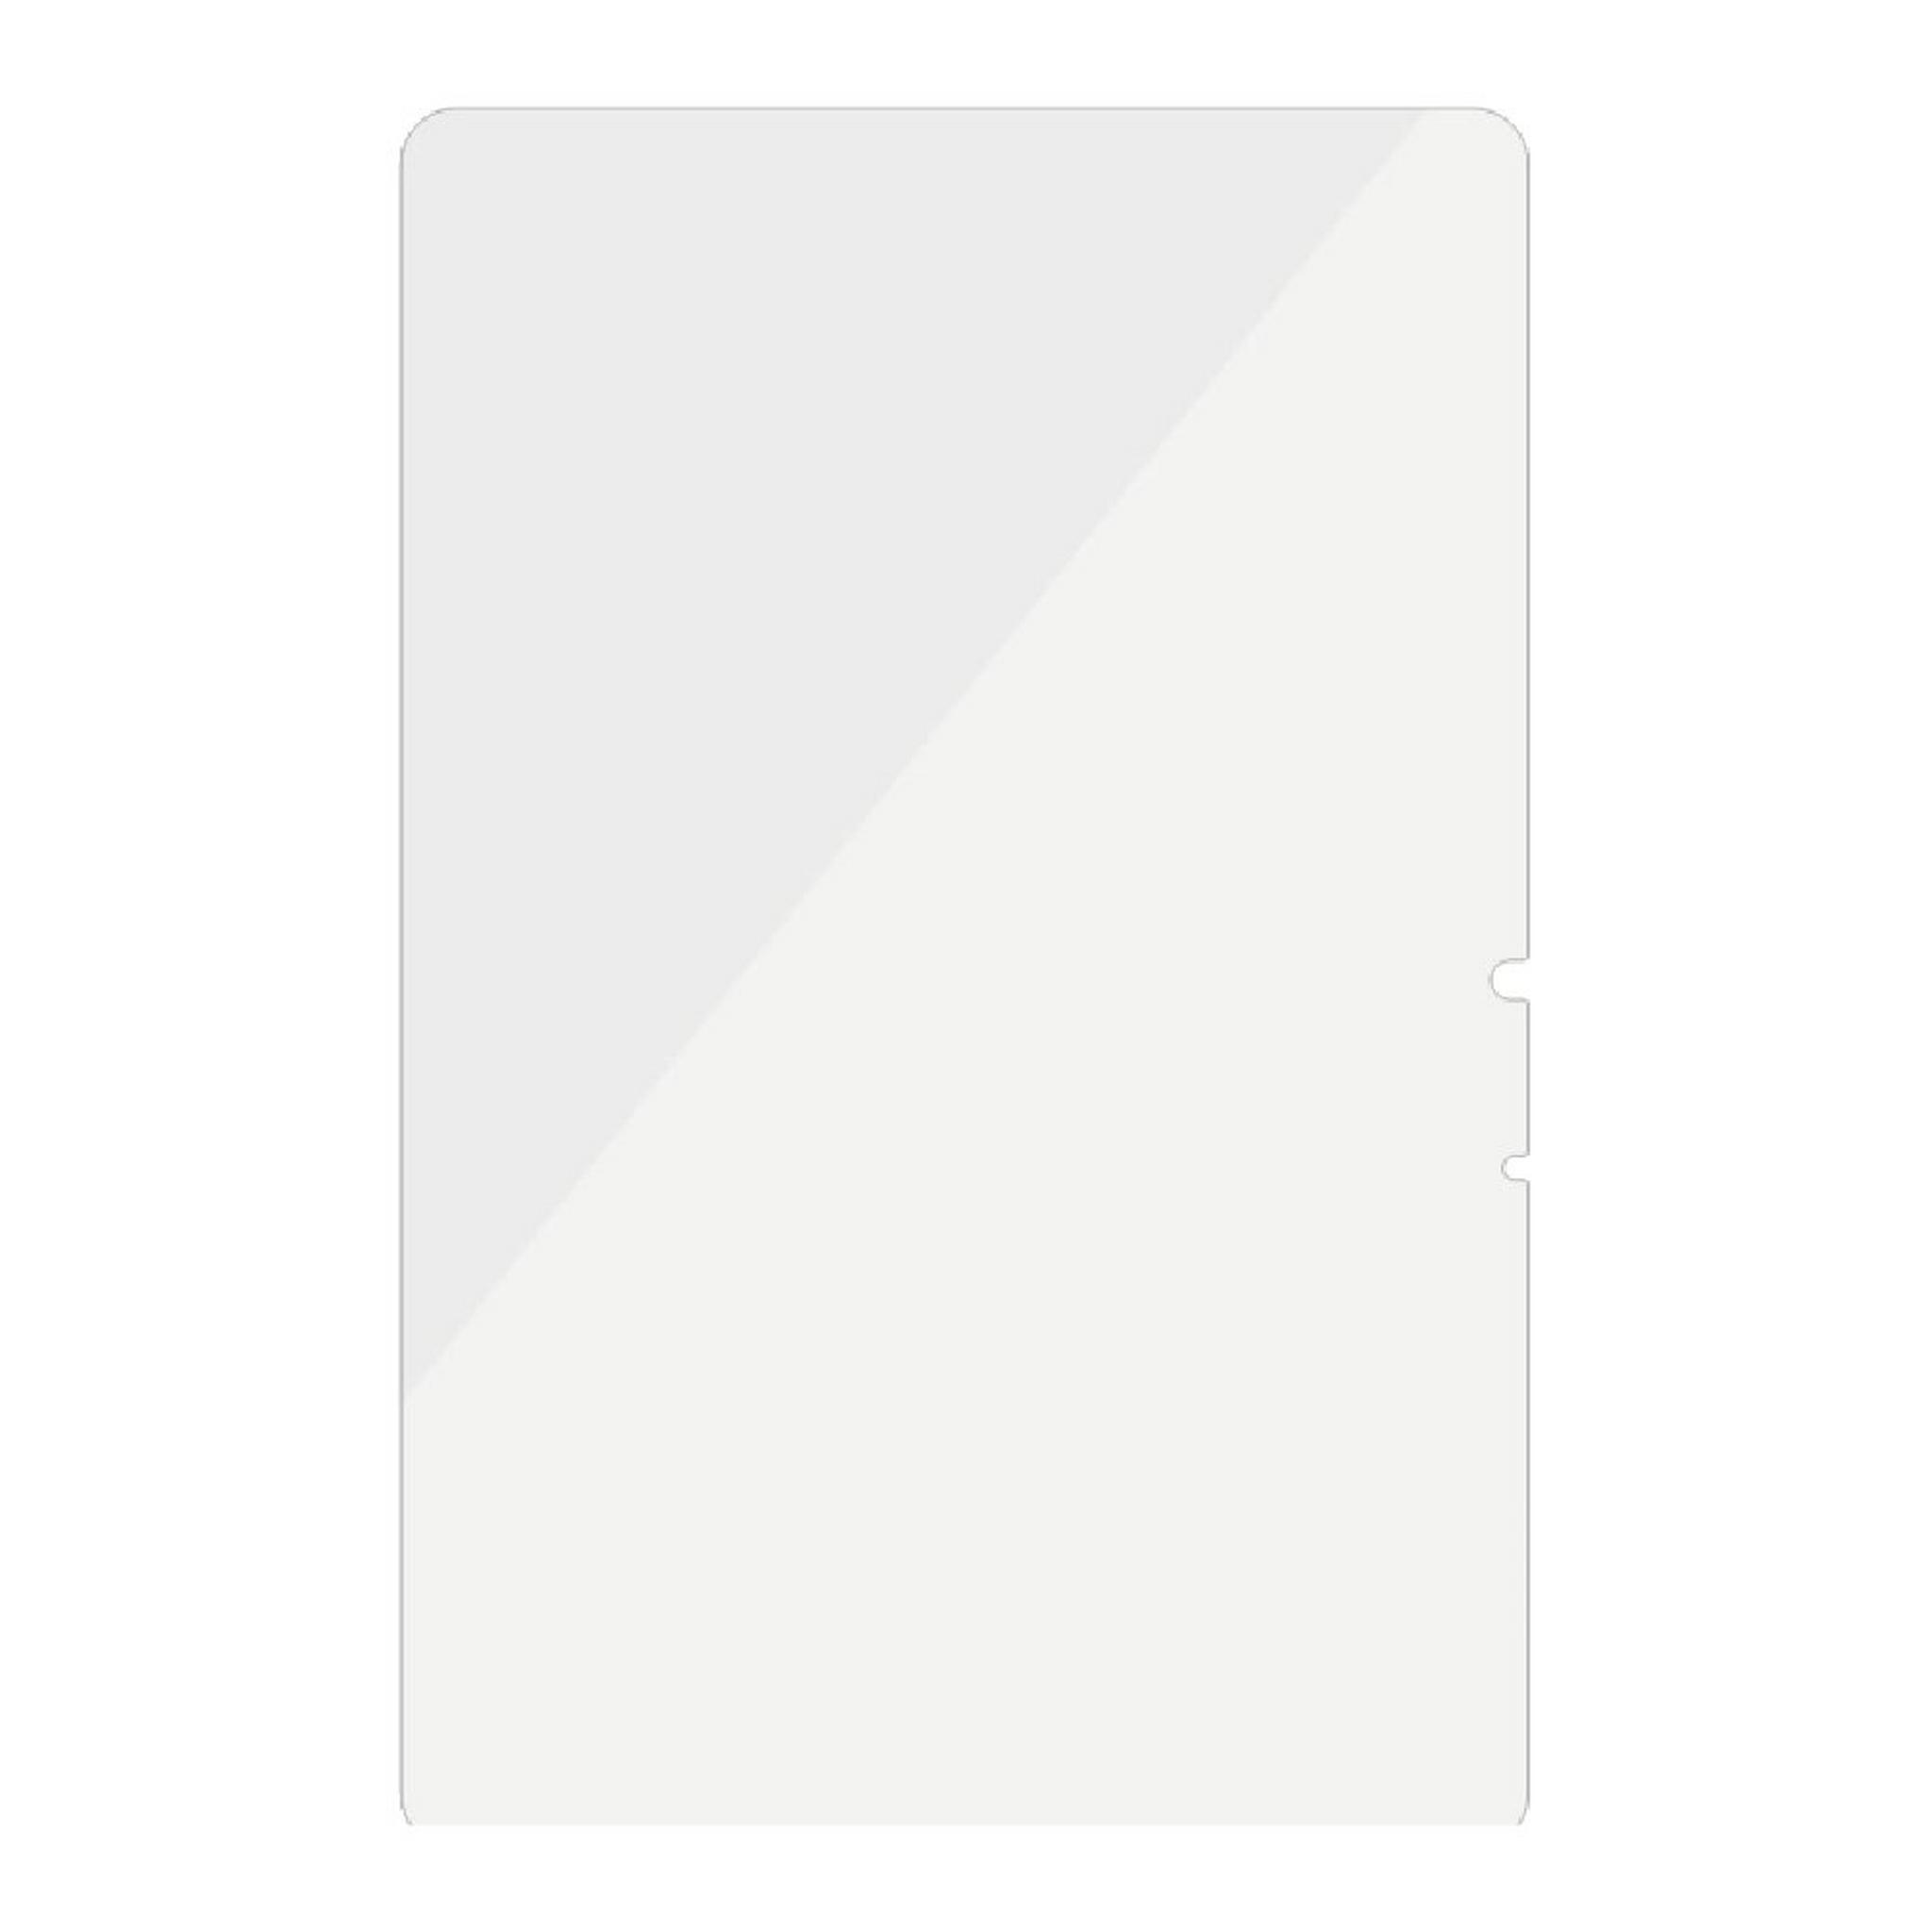 PanzerGlass Screen Protector for Samsung Galaxy Tab S7+, 7242 - Clear